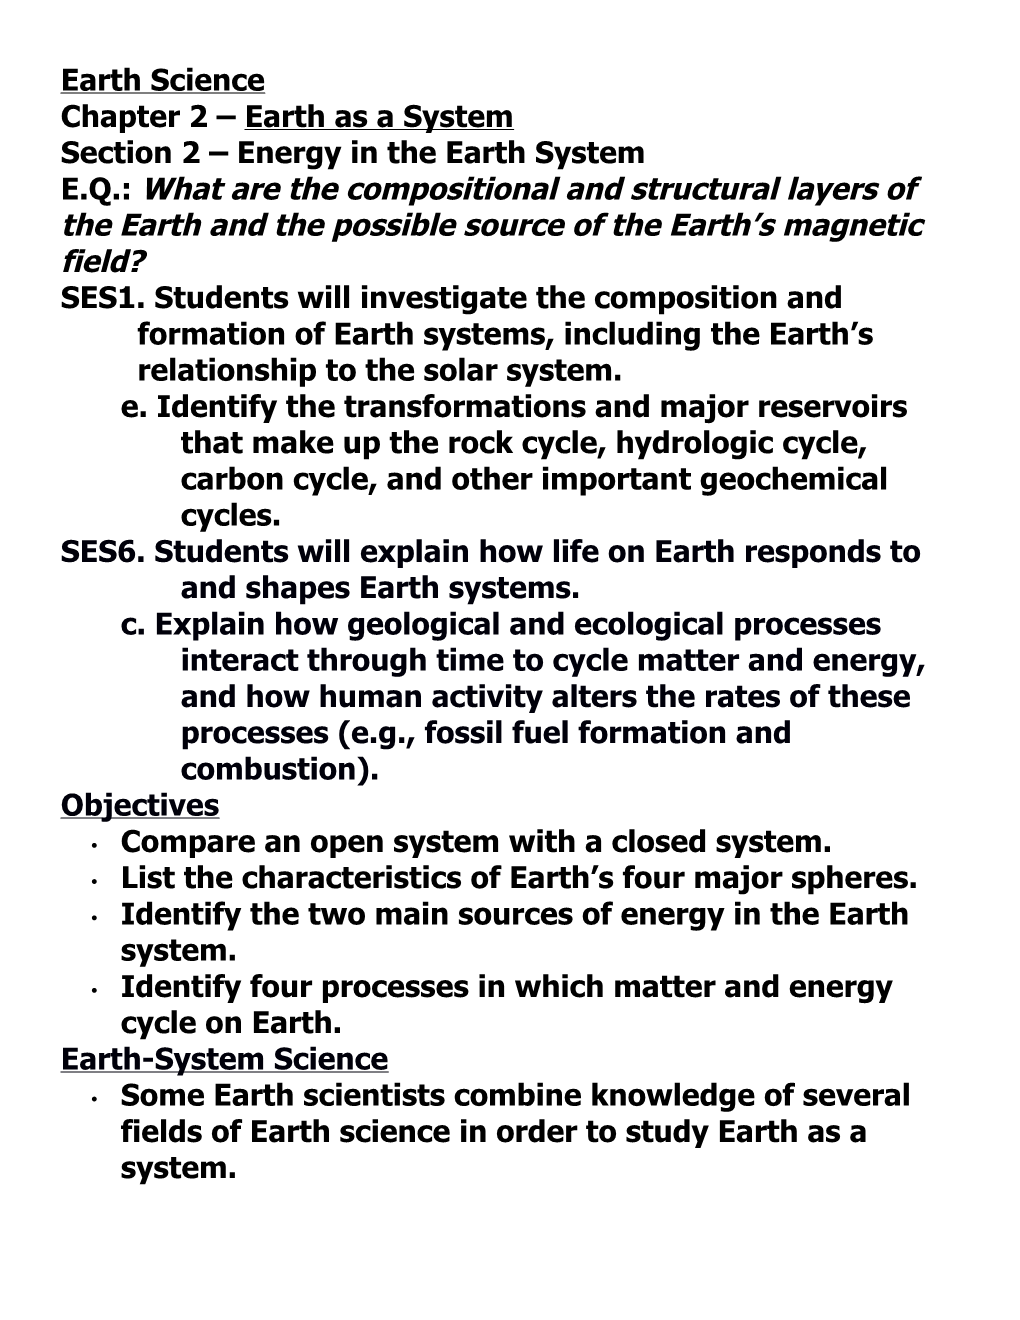 Section 2 Energy in the Earth System